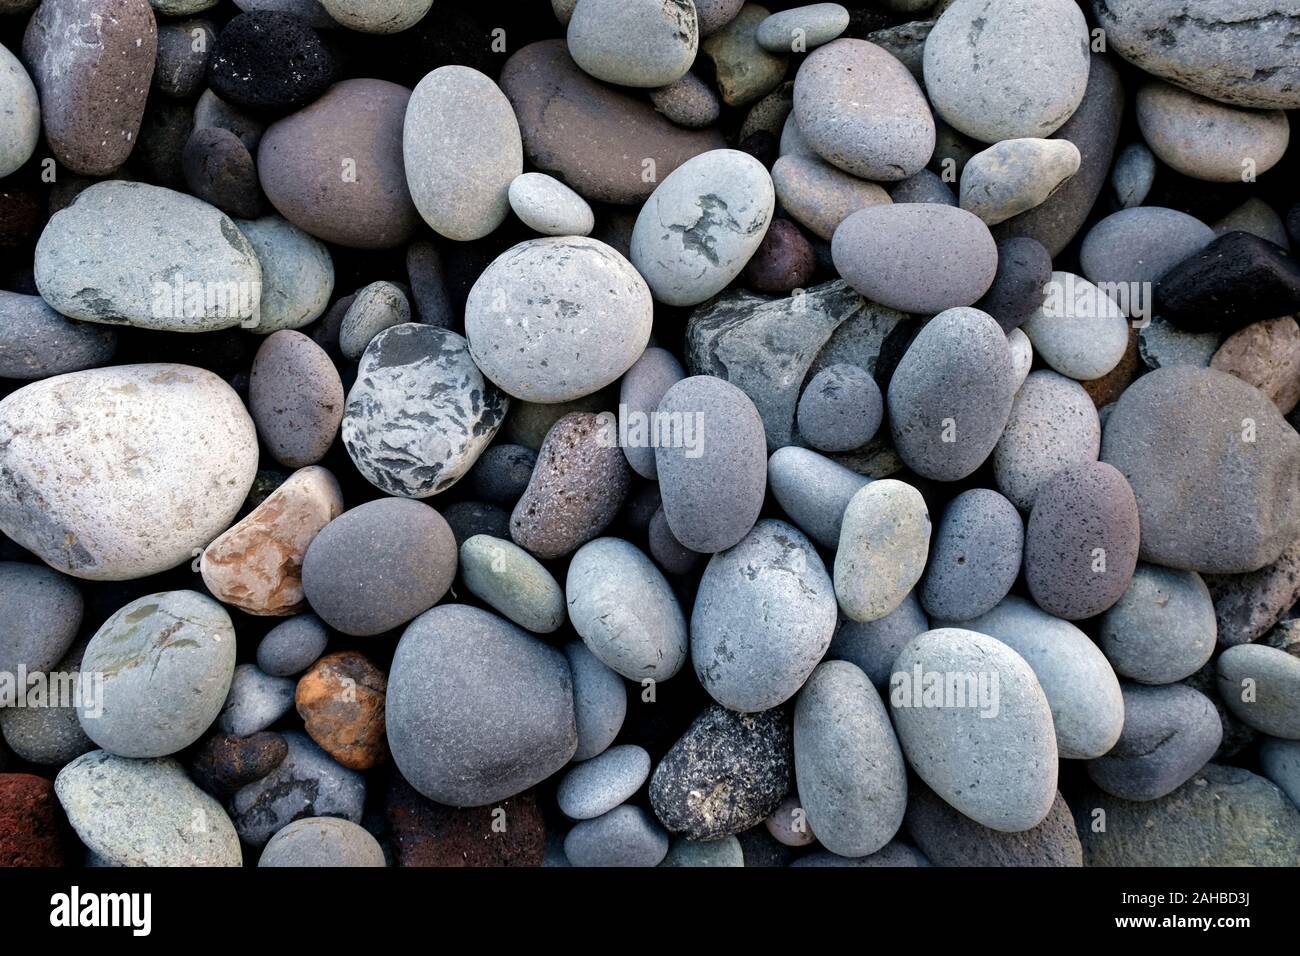 Pebbles and stones, various sizes and shapes, various minerals, close view. Stock Photo